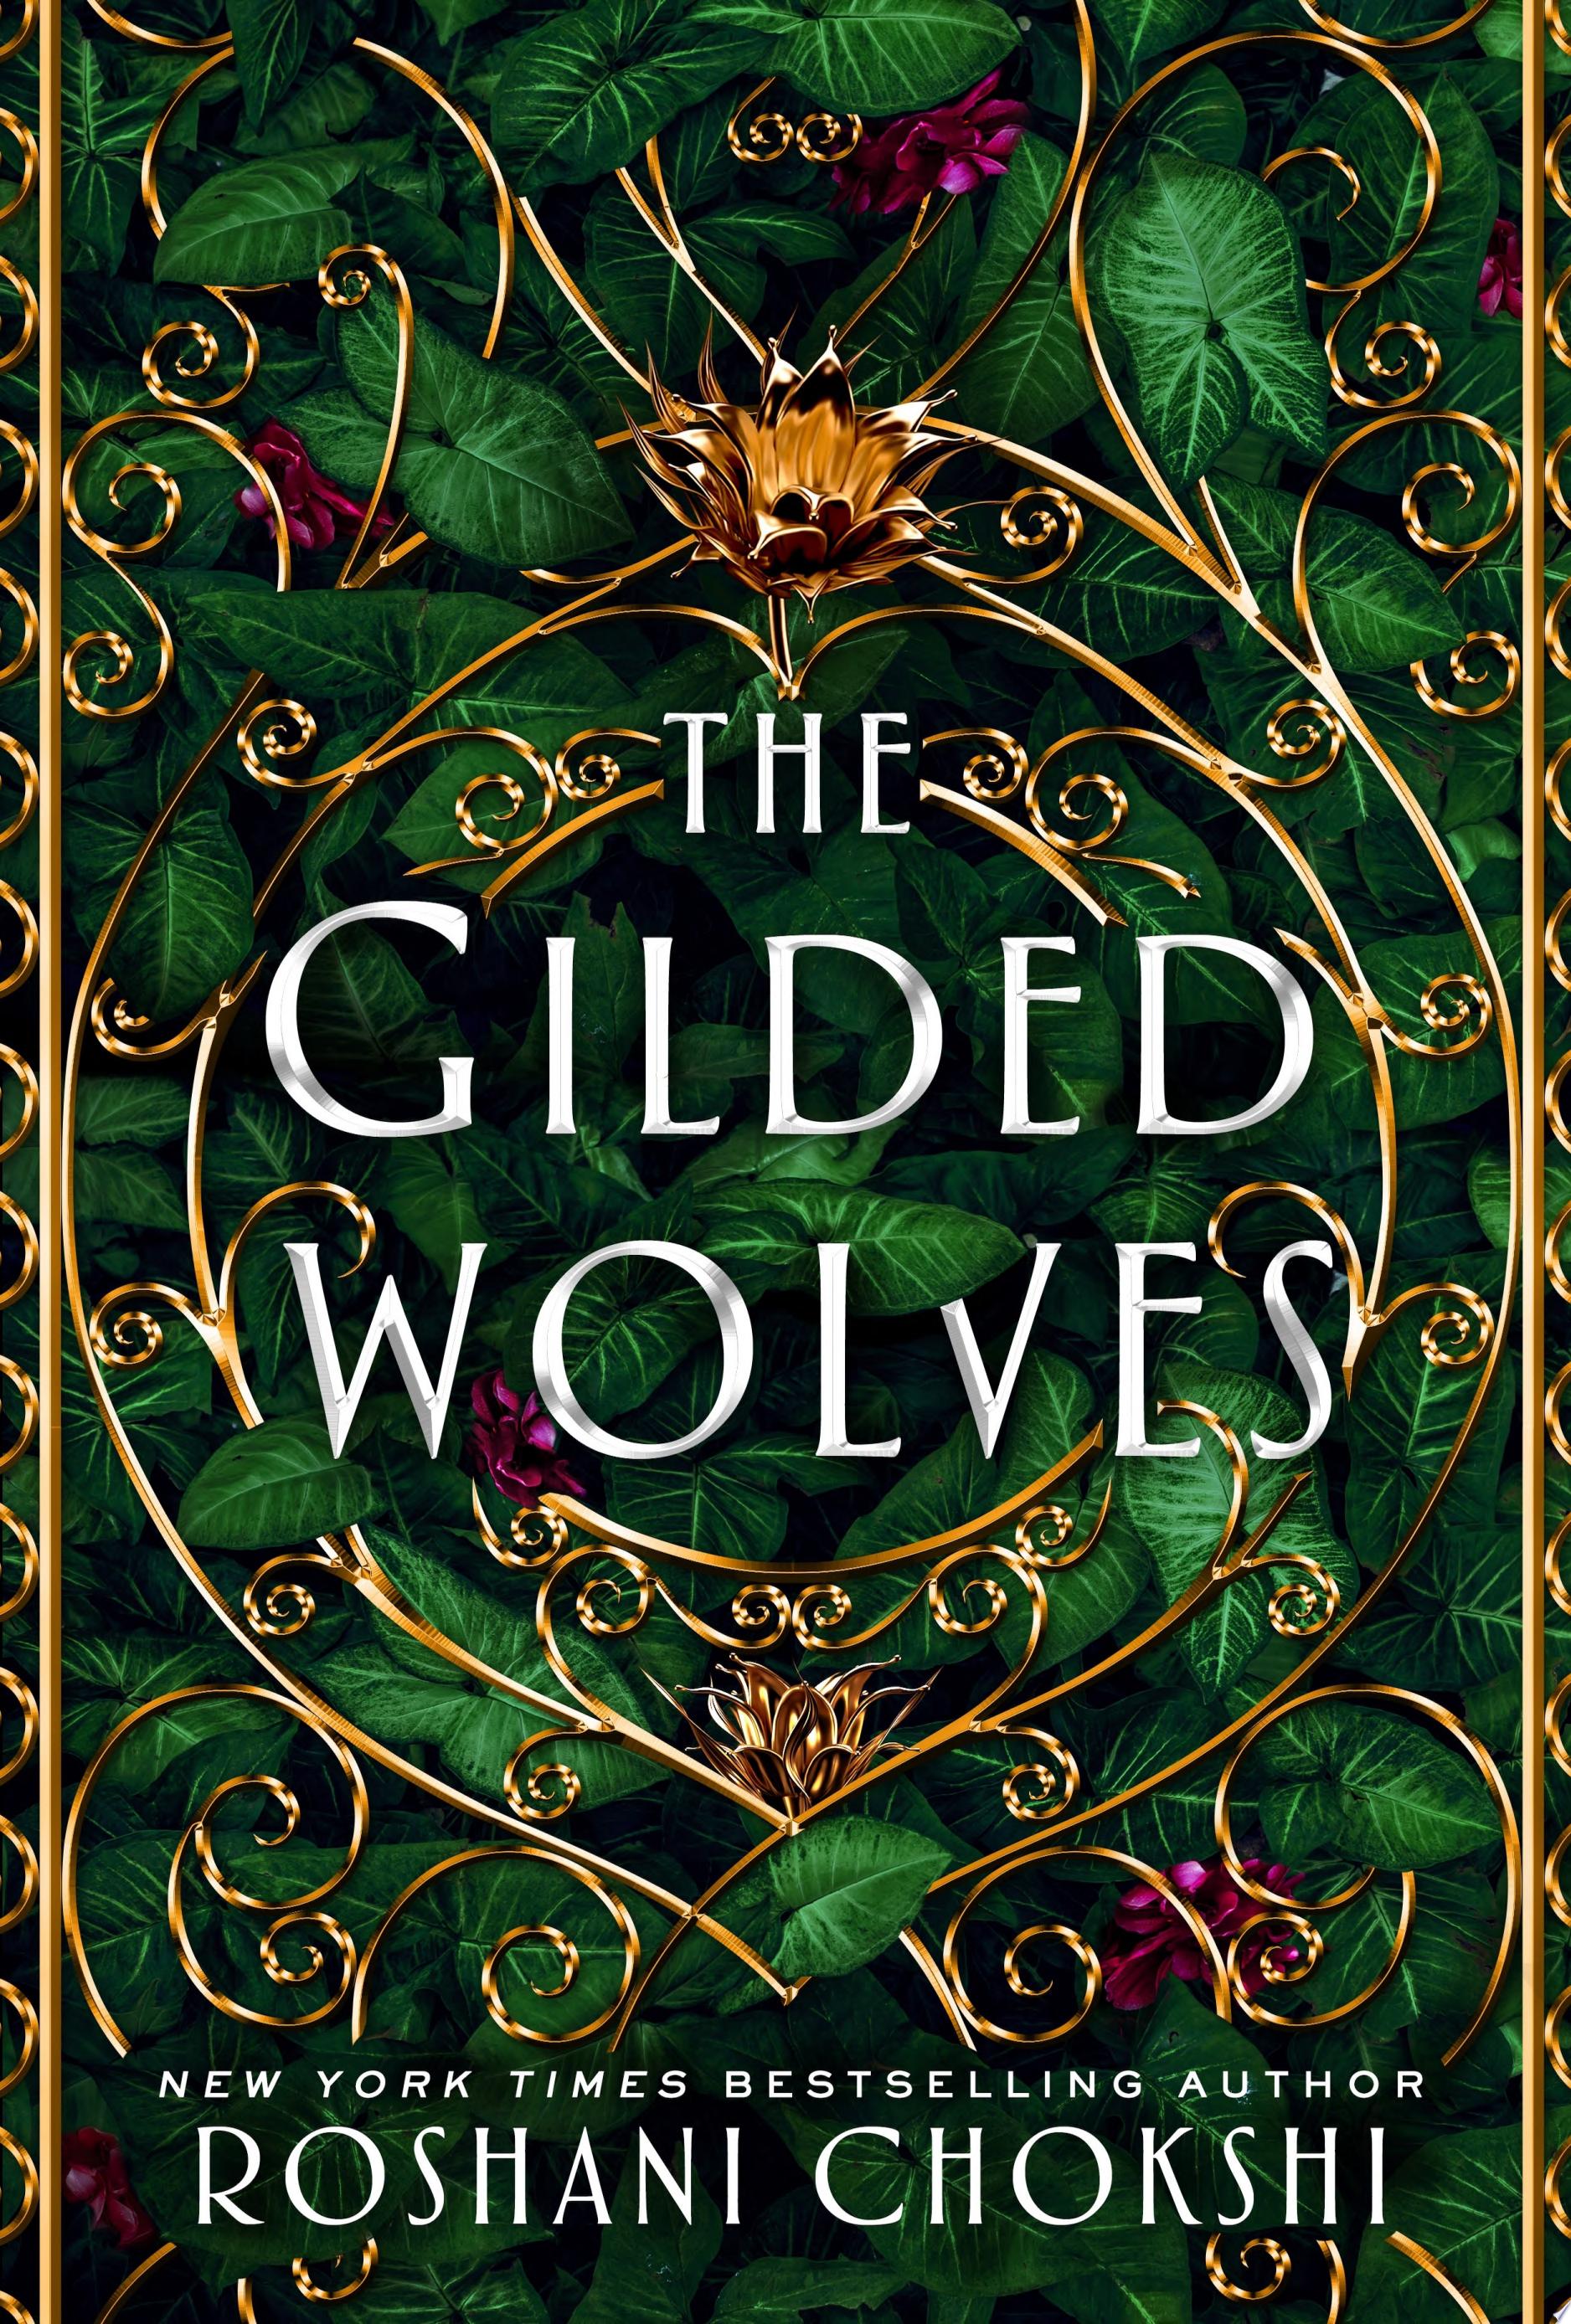 Image for "The Gilded Wolves"